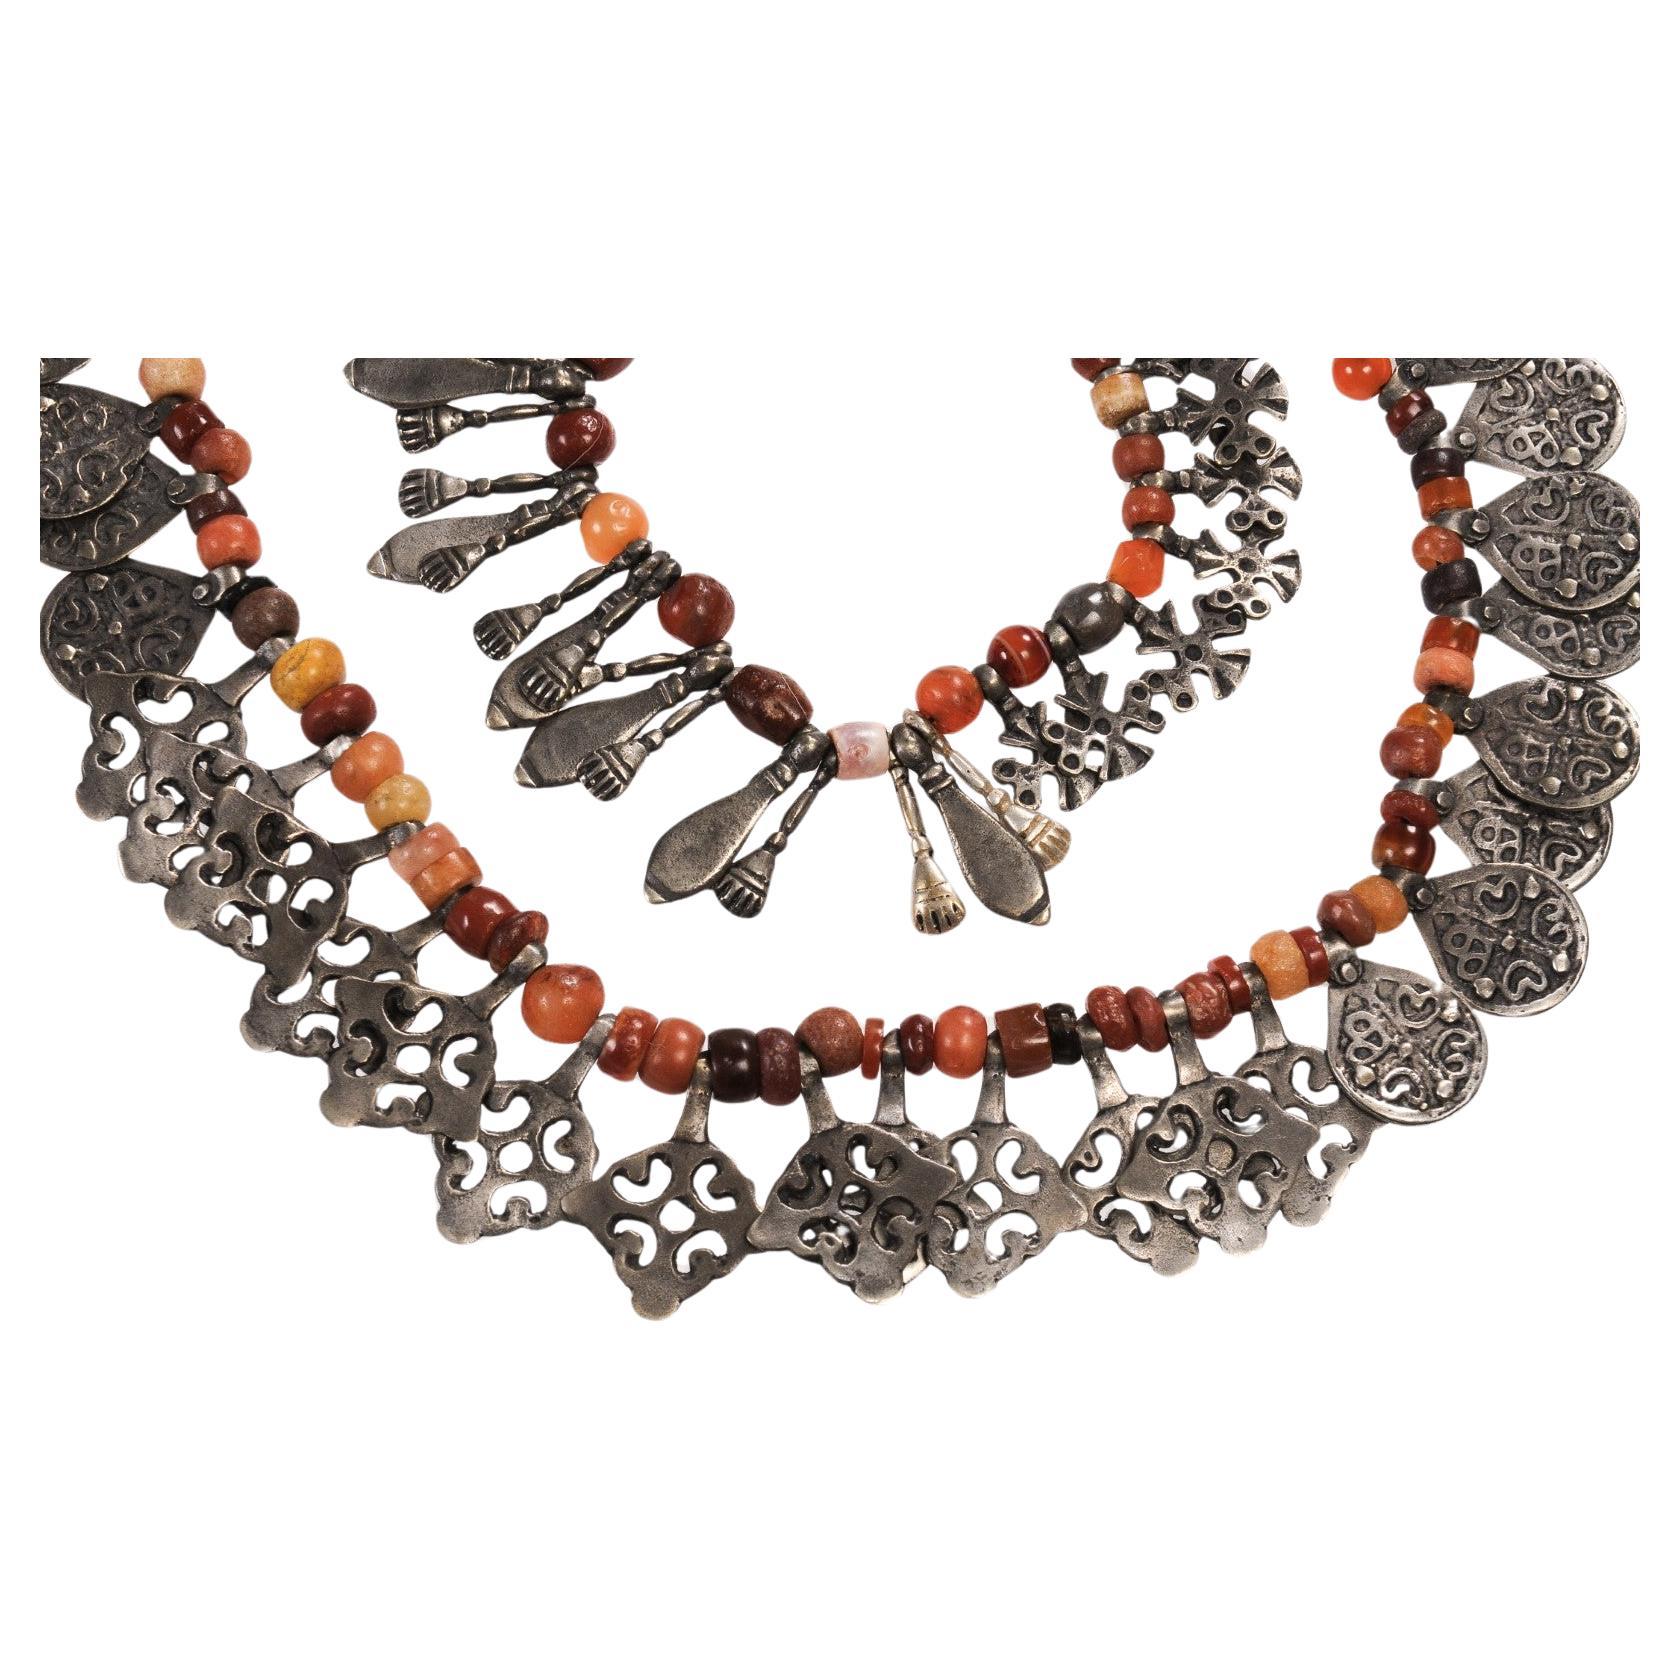 A Custom Made Necklace by Famous Moroccan Jeweler Chez Faouzi of Marrakech. A Double Stranded Necklace made up of Antique Carnelian Beads and Hand Tooled Antique Moroccan Silver Accent Charms with the Signature Faouzi Back Neck Charm. The black